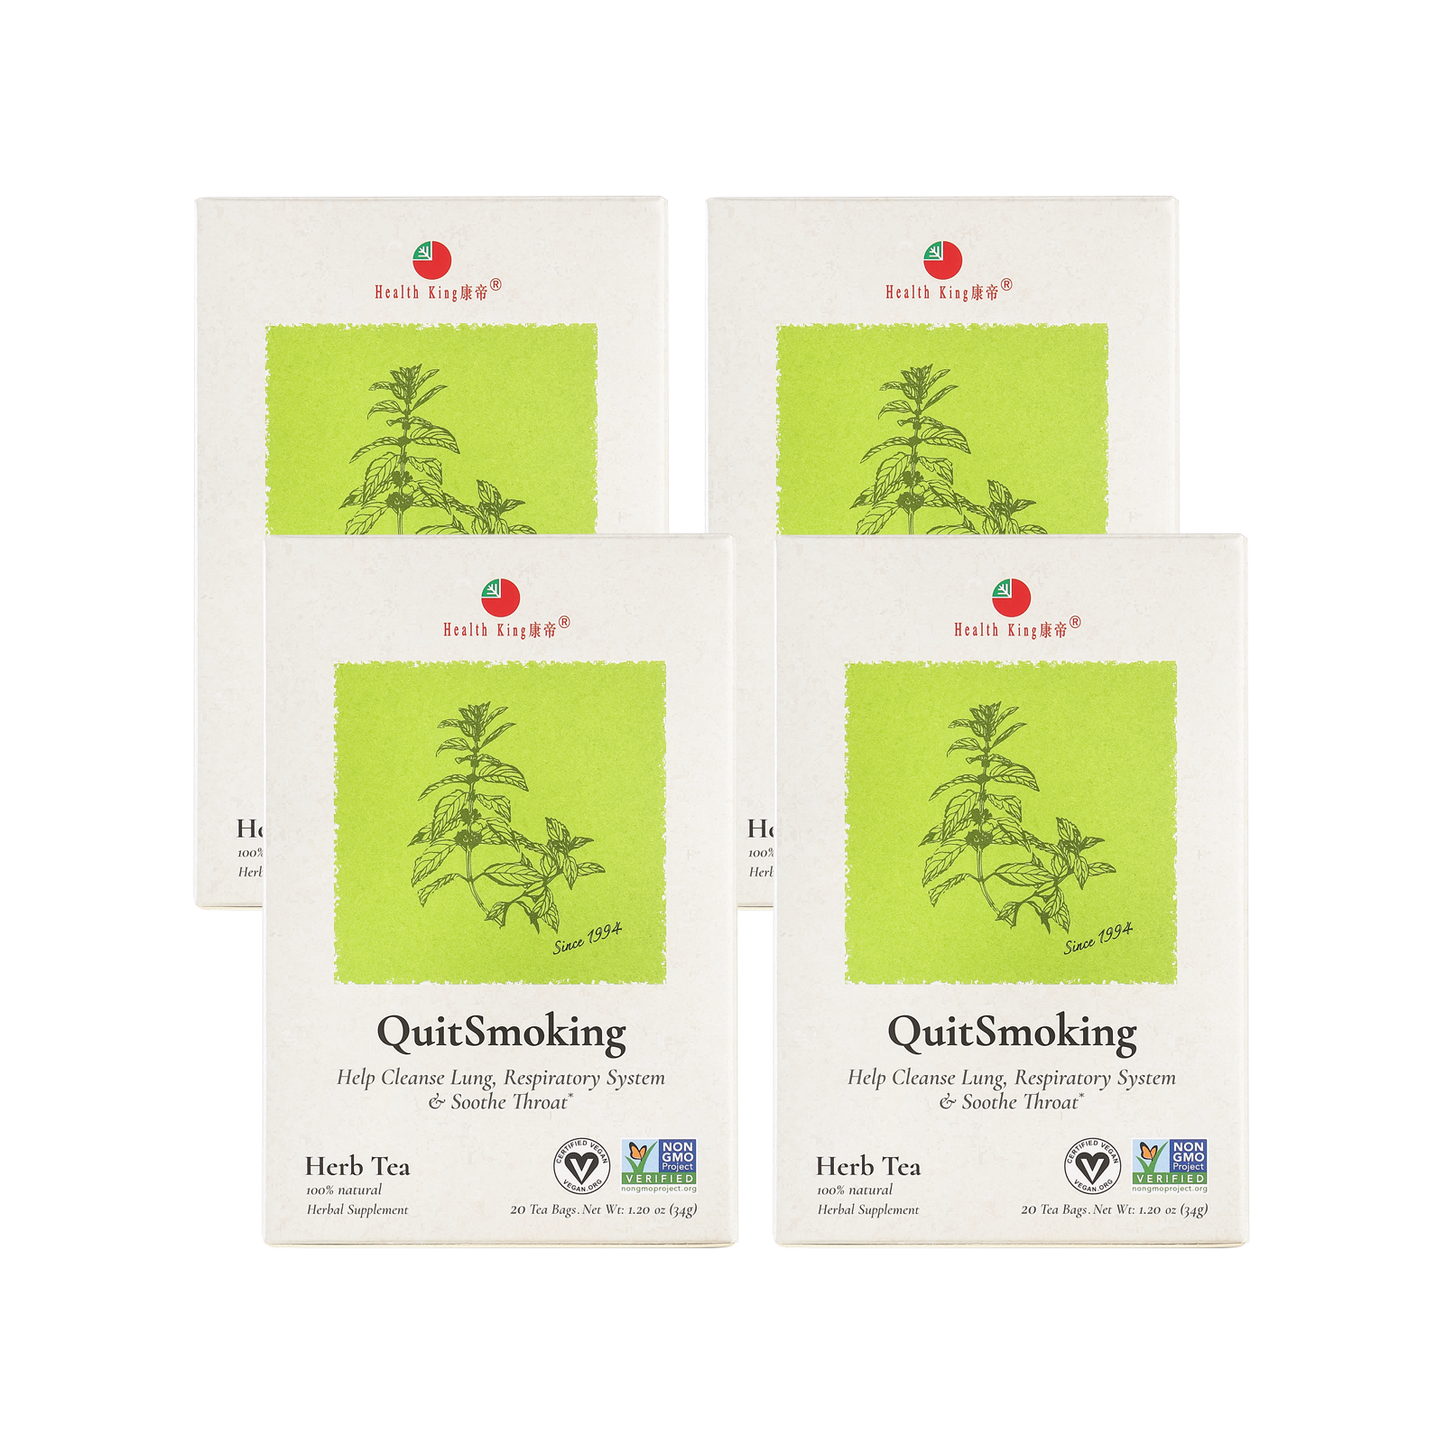 Four of Quit Smoking Herb Tea boxes, each promoting throat soothing and respiratory health